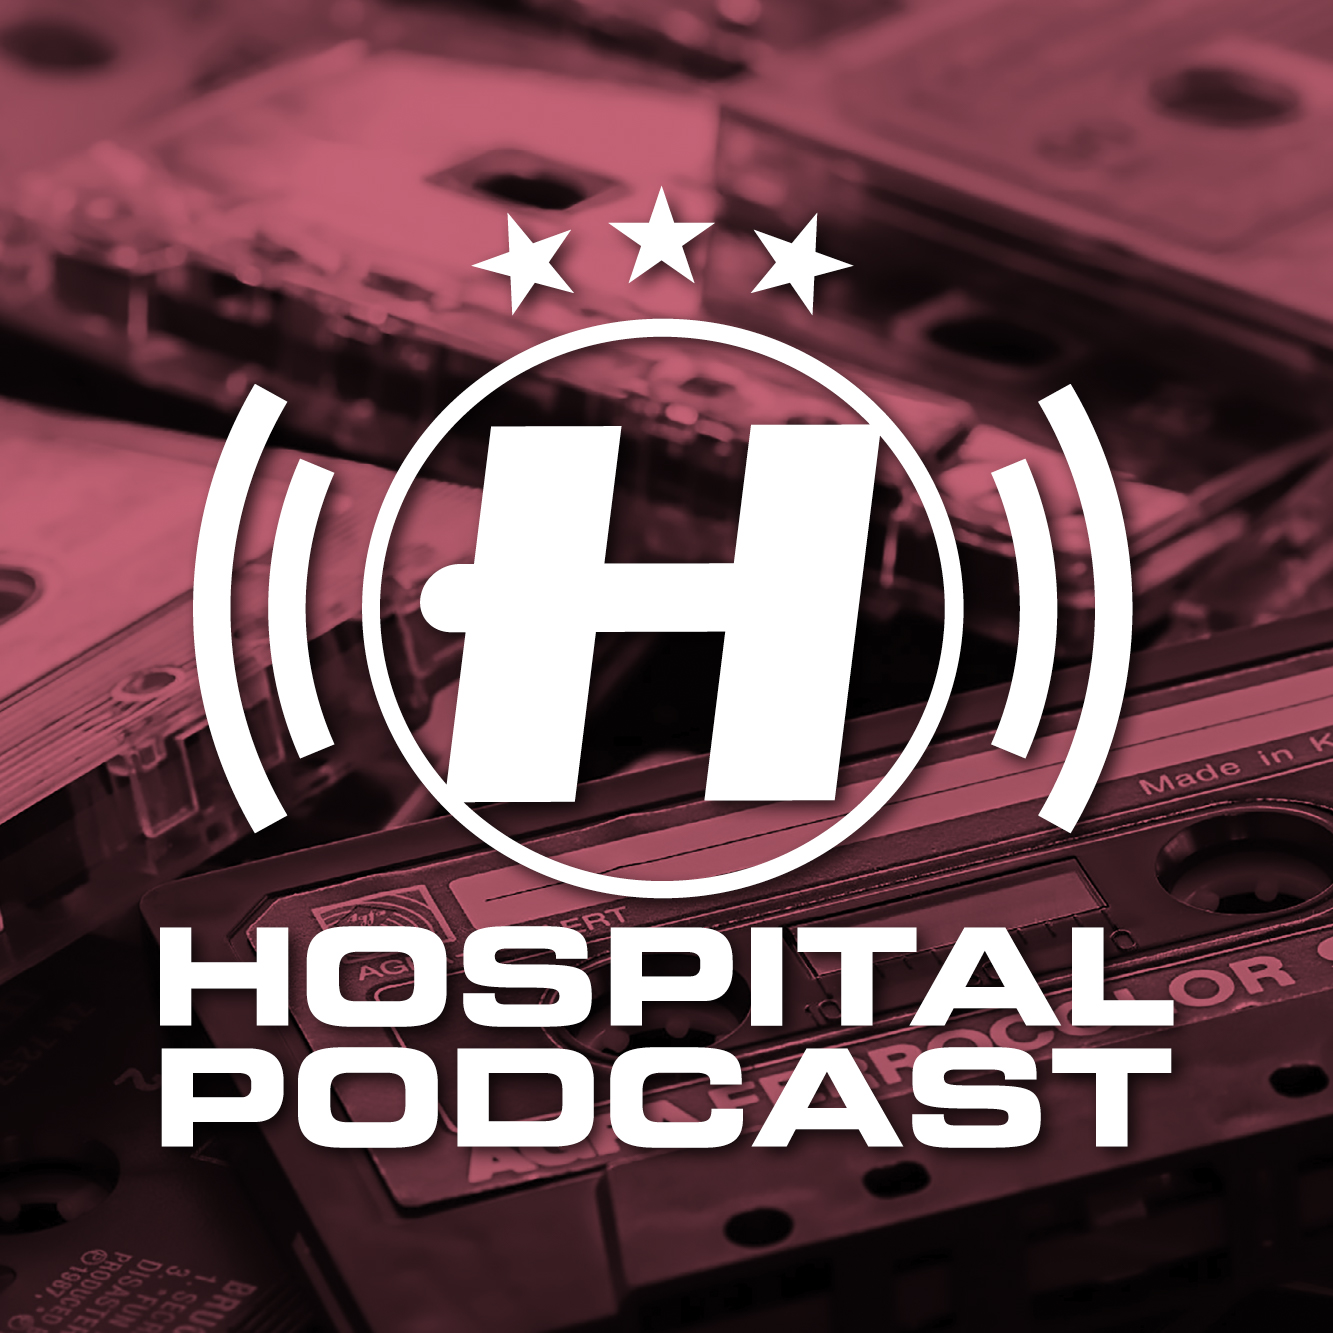 Hospital Democast (March 2021) with Lally Artwork